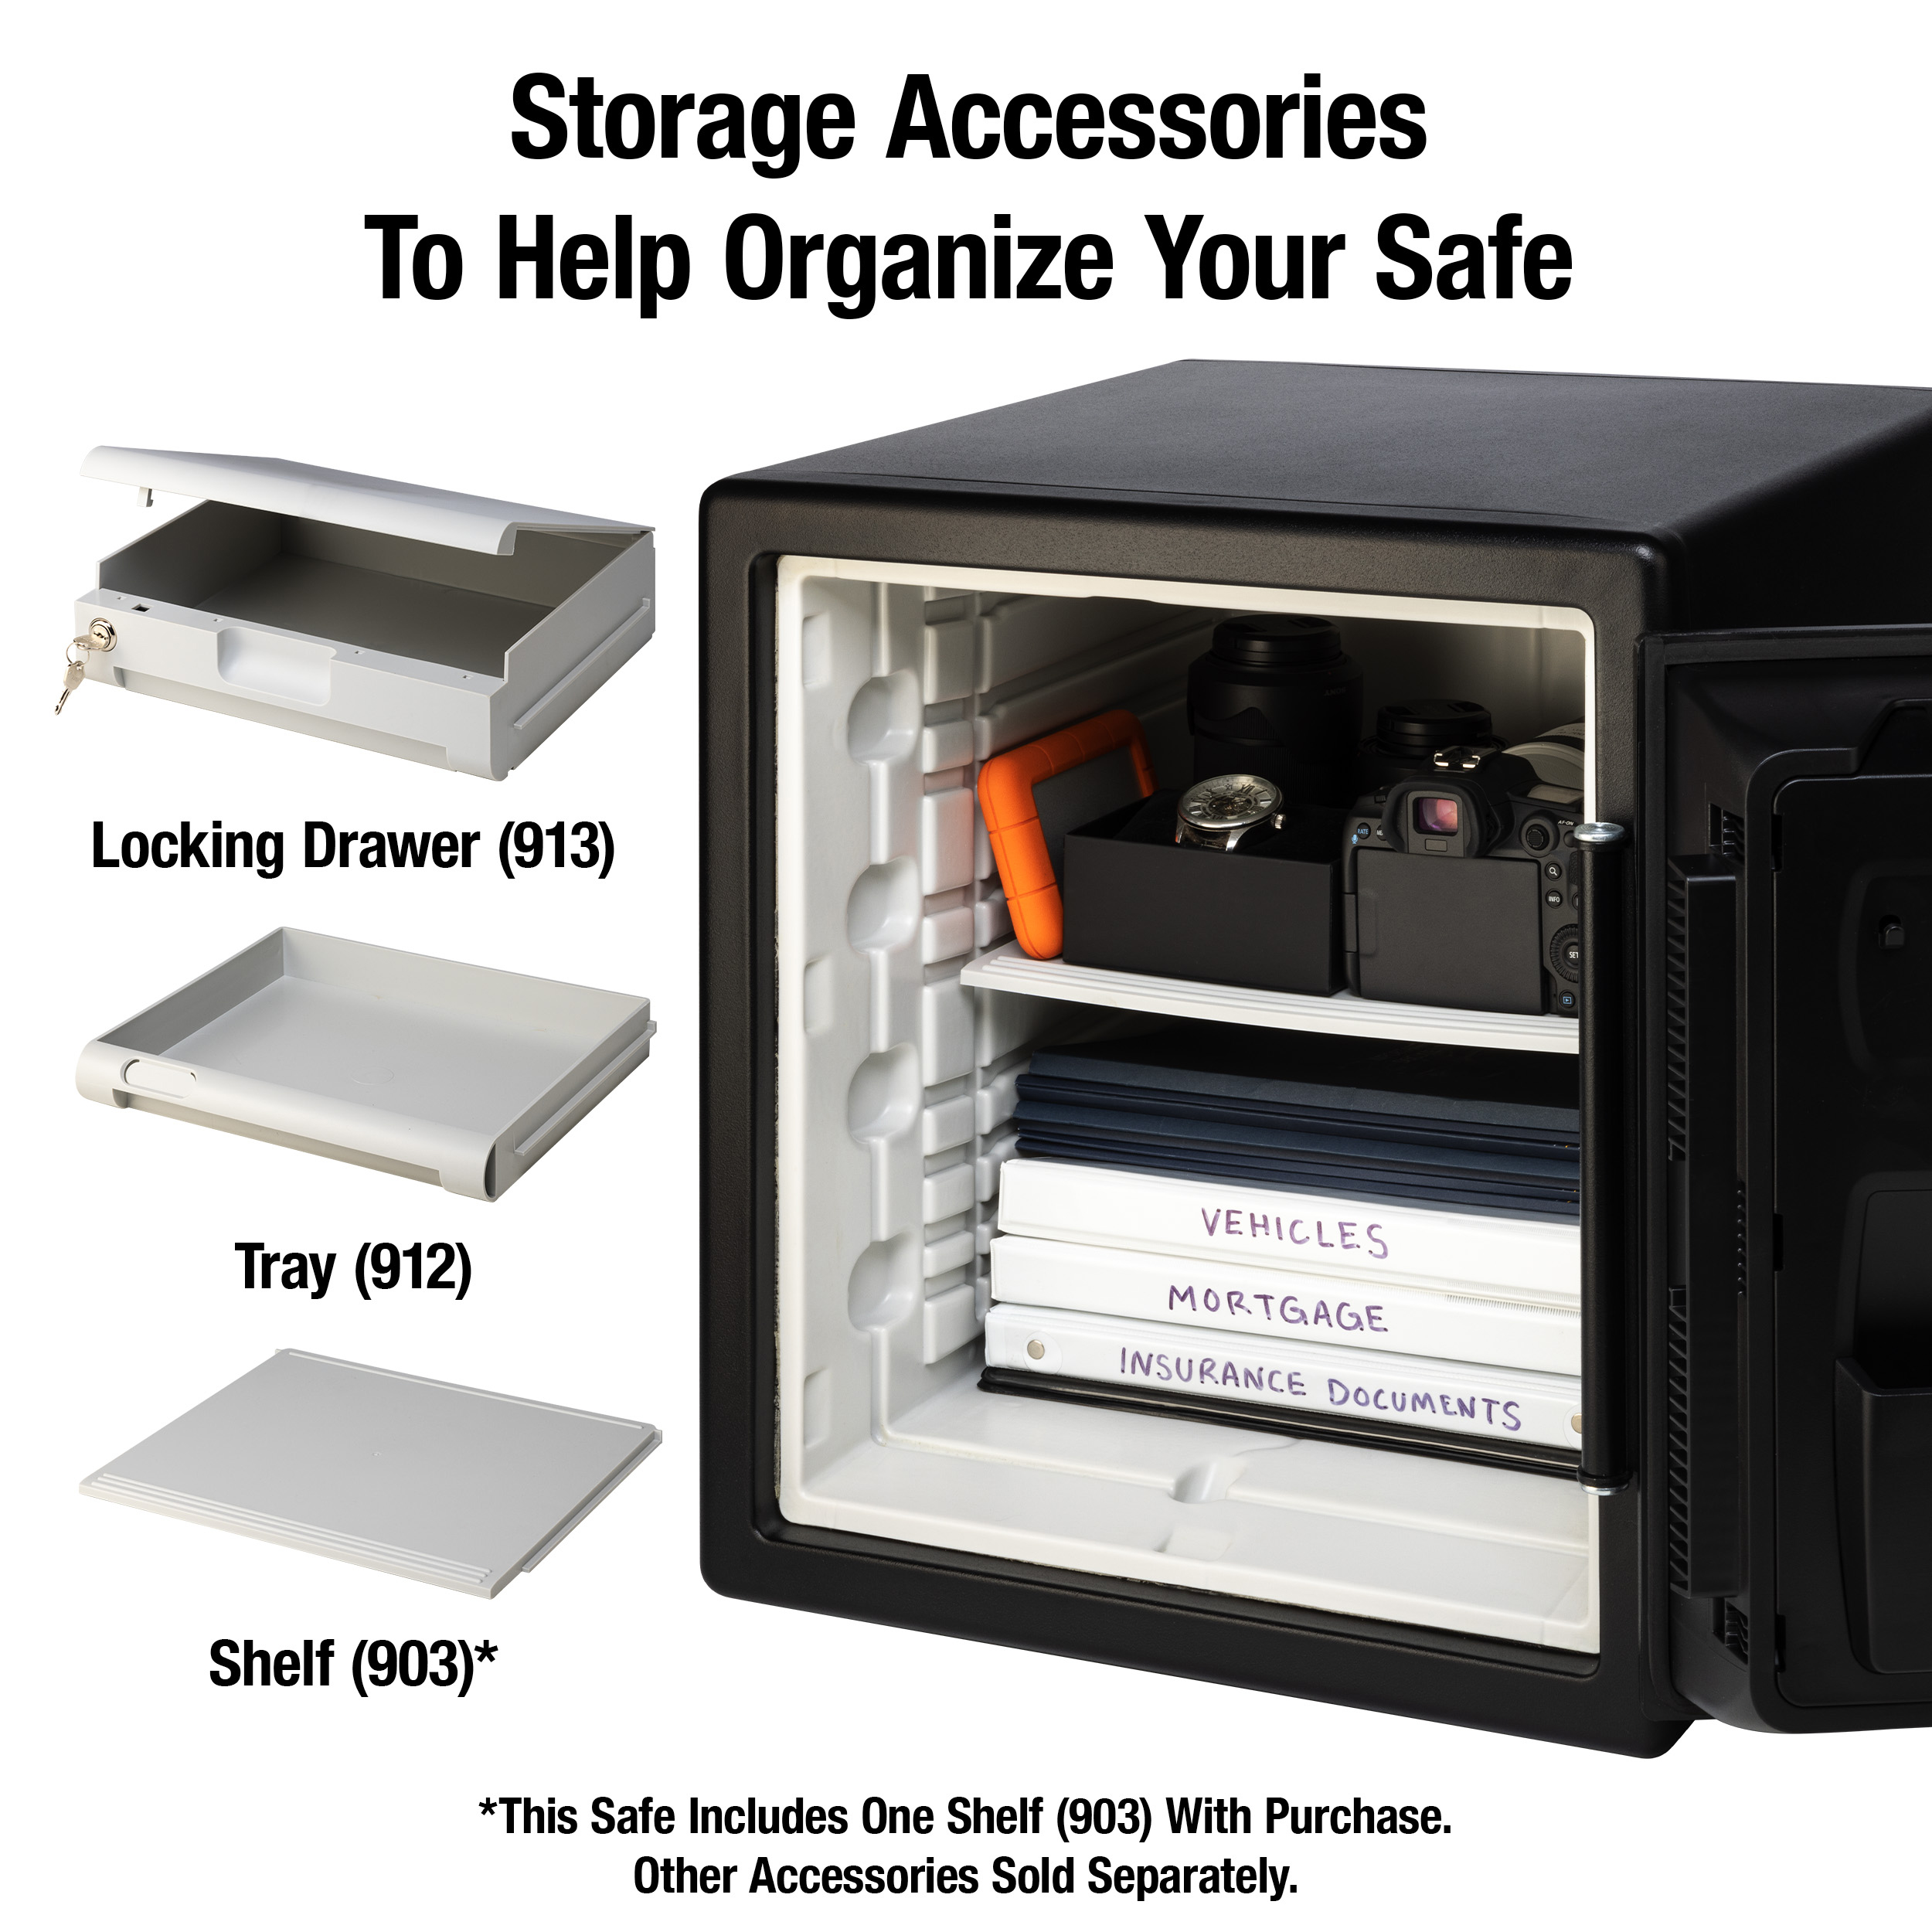 SentrySafe SFW123CS Fire-Resistant Safe and Waterproof Safe with Dial Combination Lock, 1.23 cu. ft. - image 6 of 7